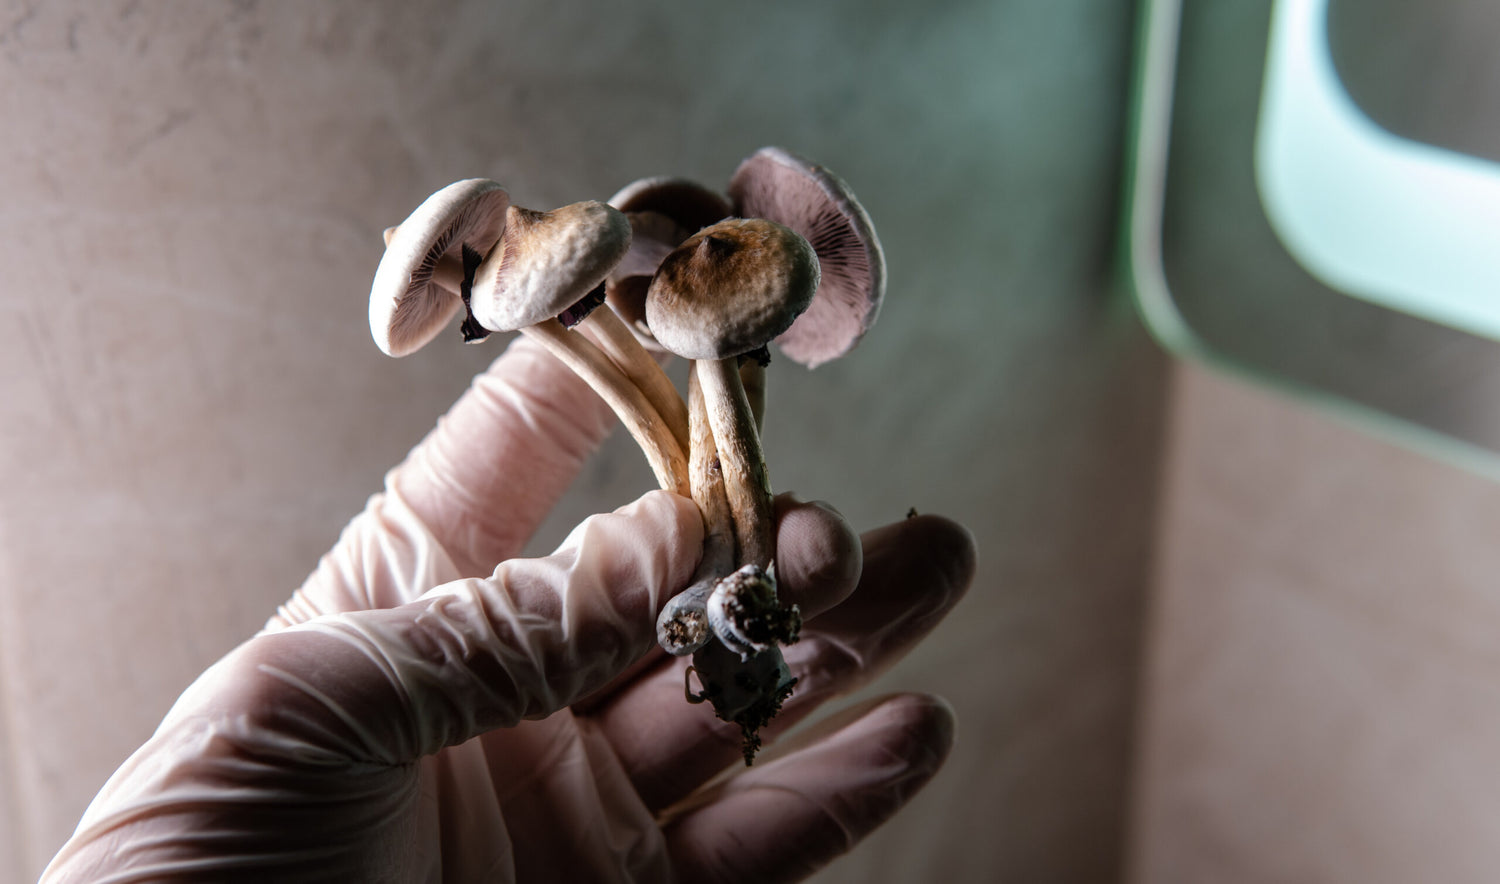 Seattle Heading Toward Decriminalizing Psychedelics With Councilmember Support